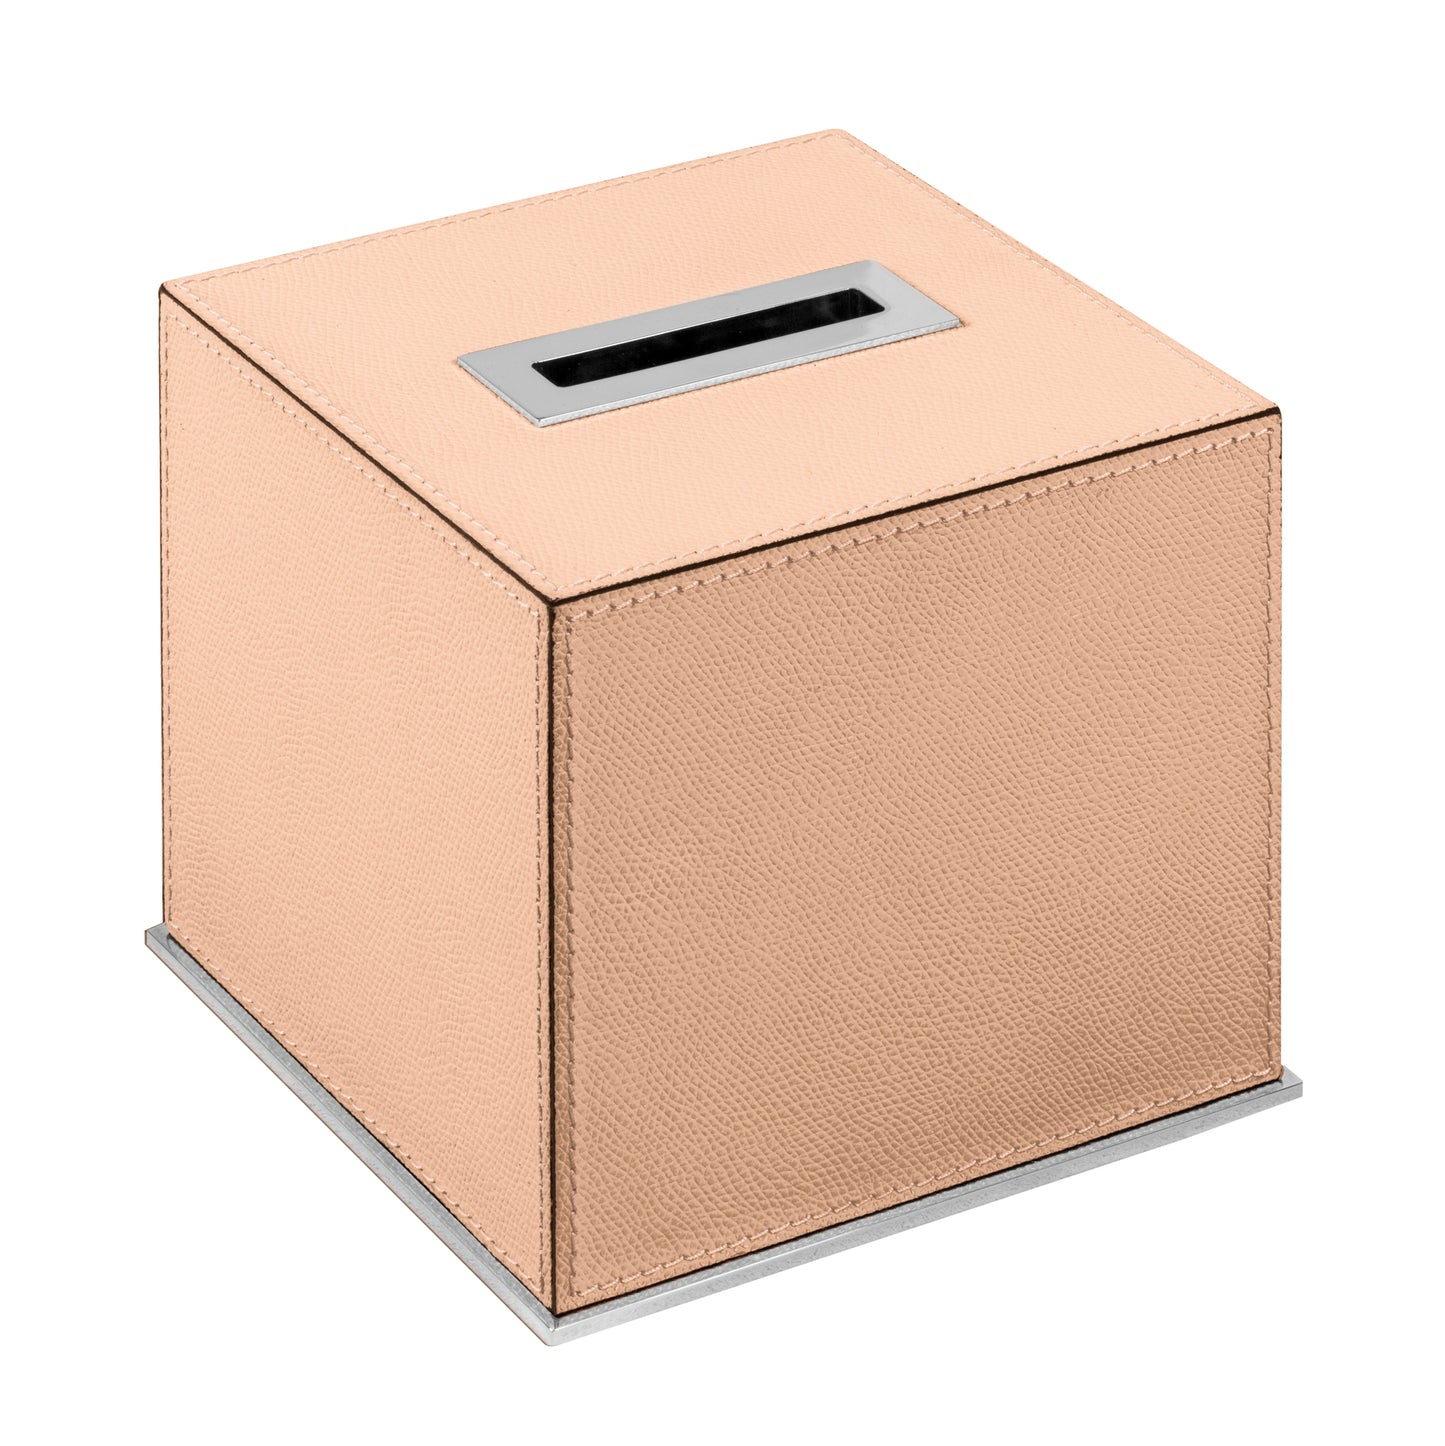 Giobagnara Firenze Tissue Holder | Leather-Covered Wood Structure | Part of Firenze Bathroom Set | Perfect for Yacht Decor | Available exclusively at 2Jour Concierge